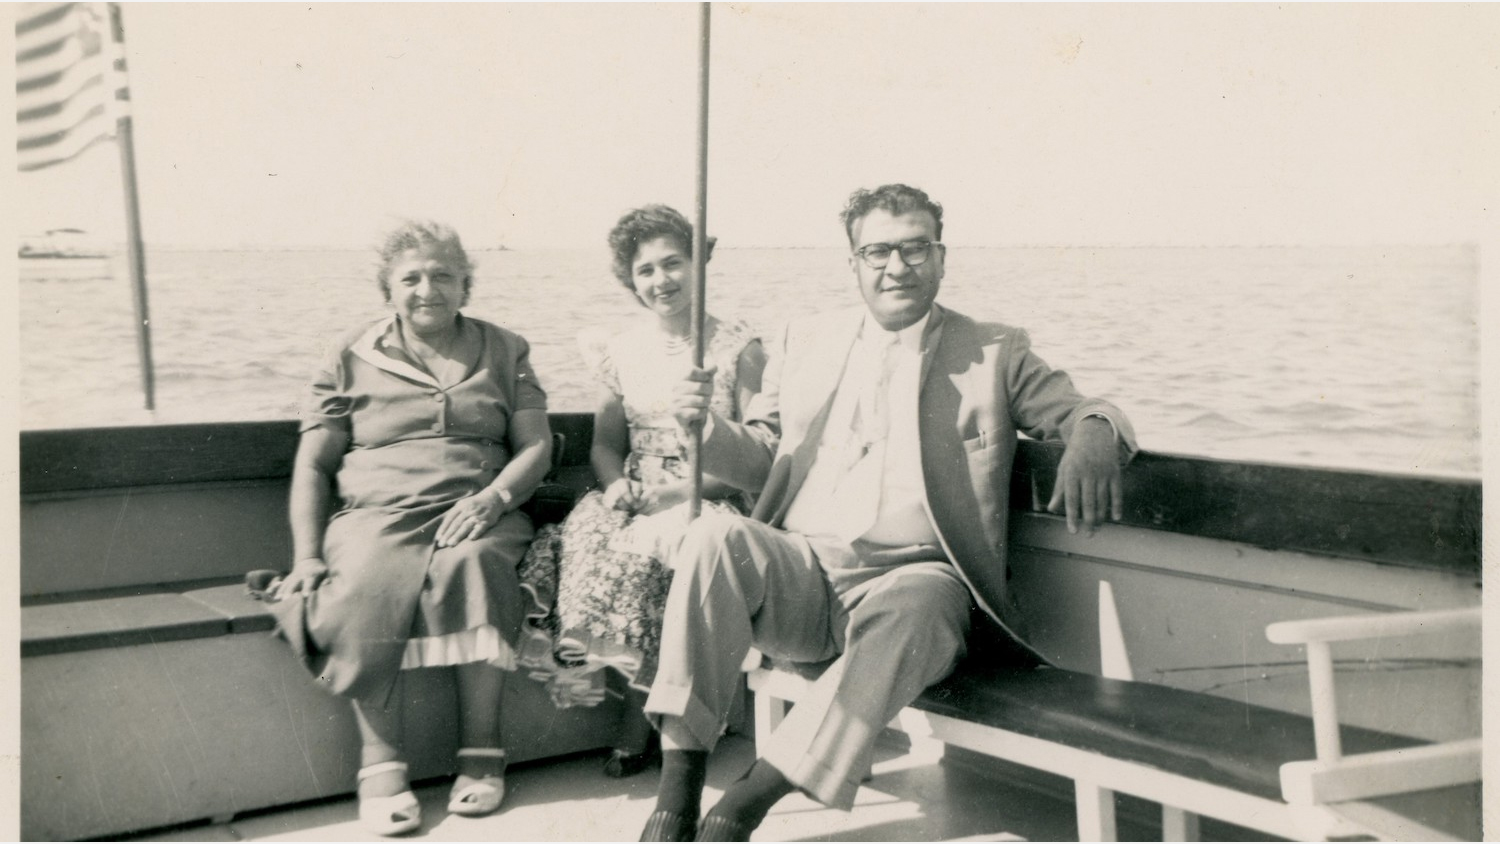 Three people sitting on bench on boat